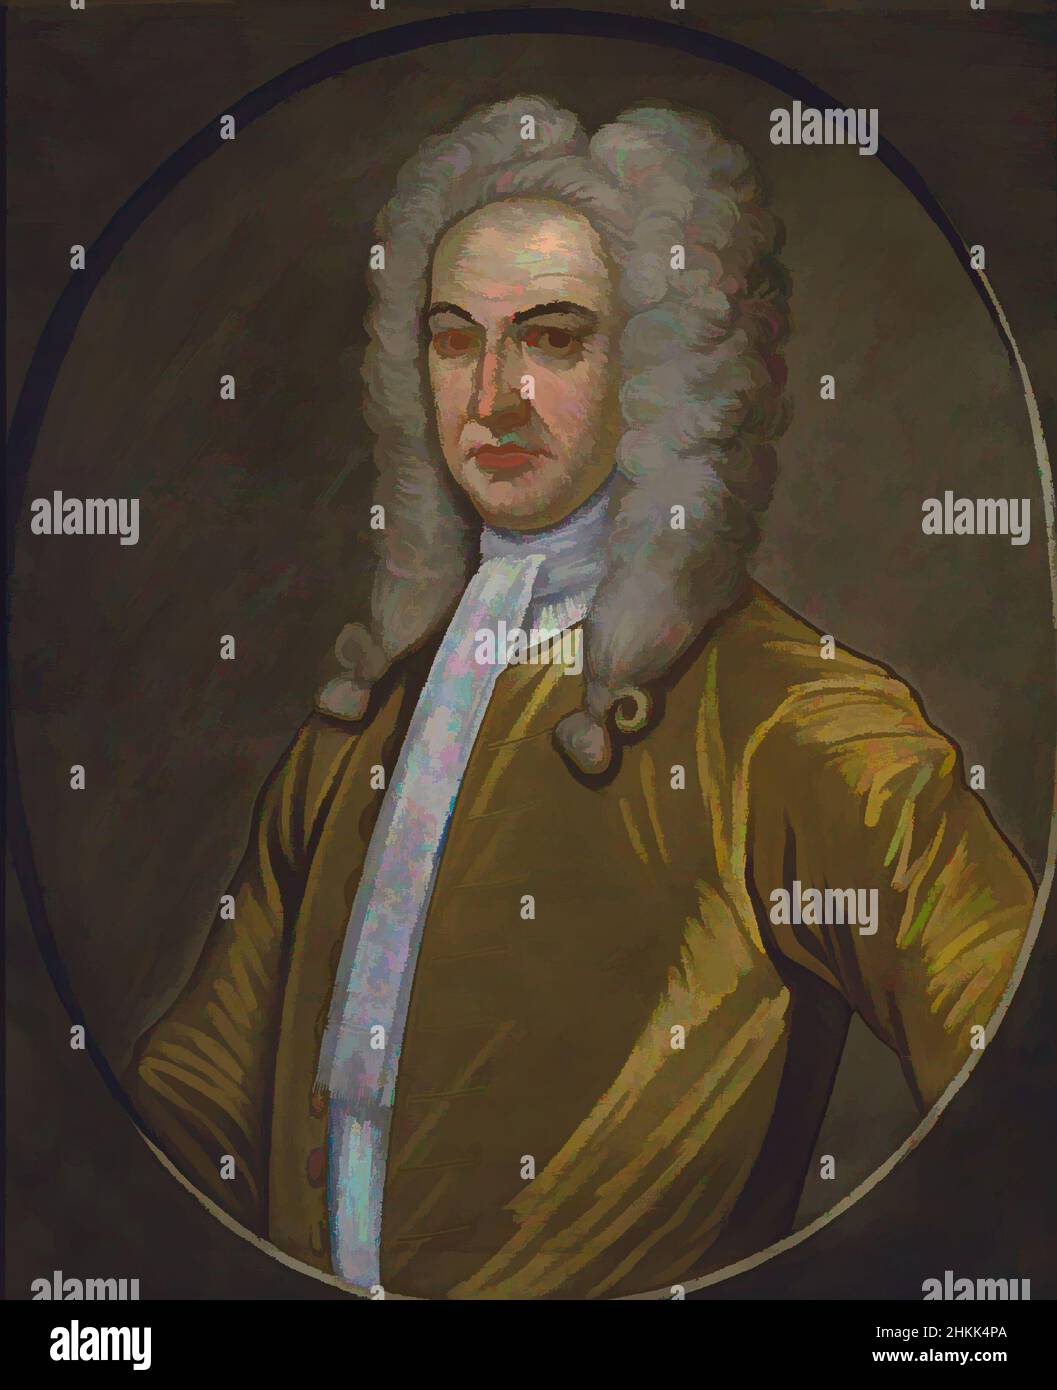 Art inspired by Governor Lewis Morris, John Watson, American, 1685-1768, Oil on linen, ca. 1726, 30 1/16 x 25 in., 76.3 x 63.5 cm, American Painting, British Governor, center part, Chief justice of New York, clothing, clothing for men, colonial, curly, elegant, elite, fashion, for, Classic works modernized by Artotop with a splash of modernity. Shapes, color and value, eye-catching visual impact on art. Emotions through freedom of artworks in a contemporary way. A timeless message pursuing a wildly creative new direction. Artists turning to the digital medium and creating the Artotop NFT Stock Photo